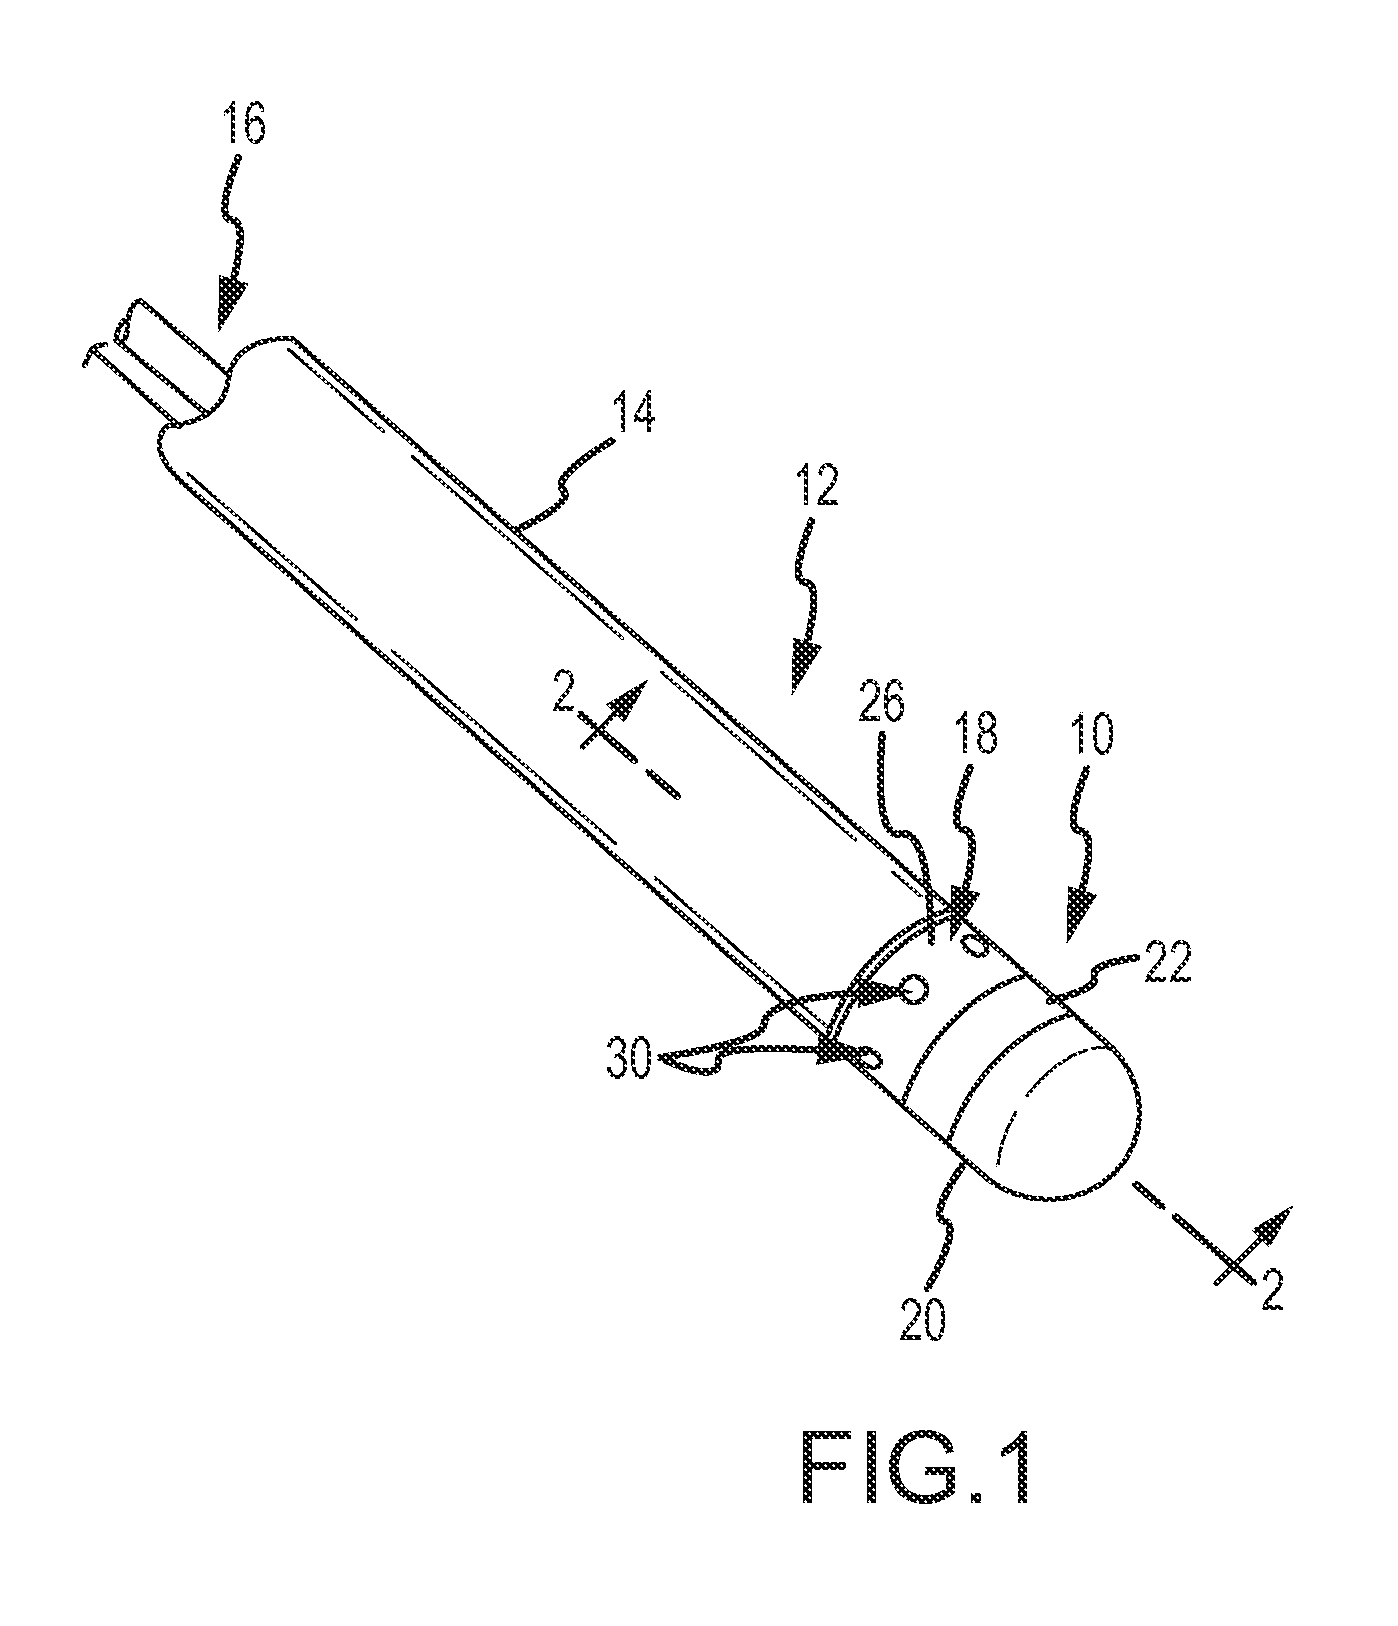 Thermally insulated irrigation catheter assembly